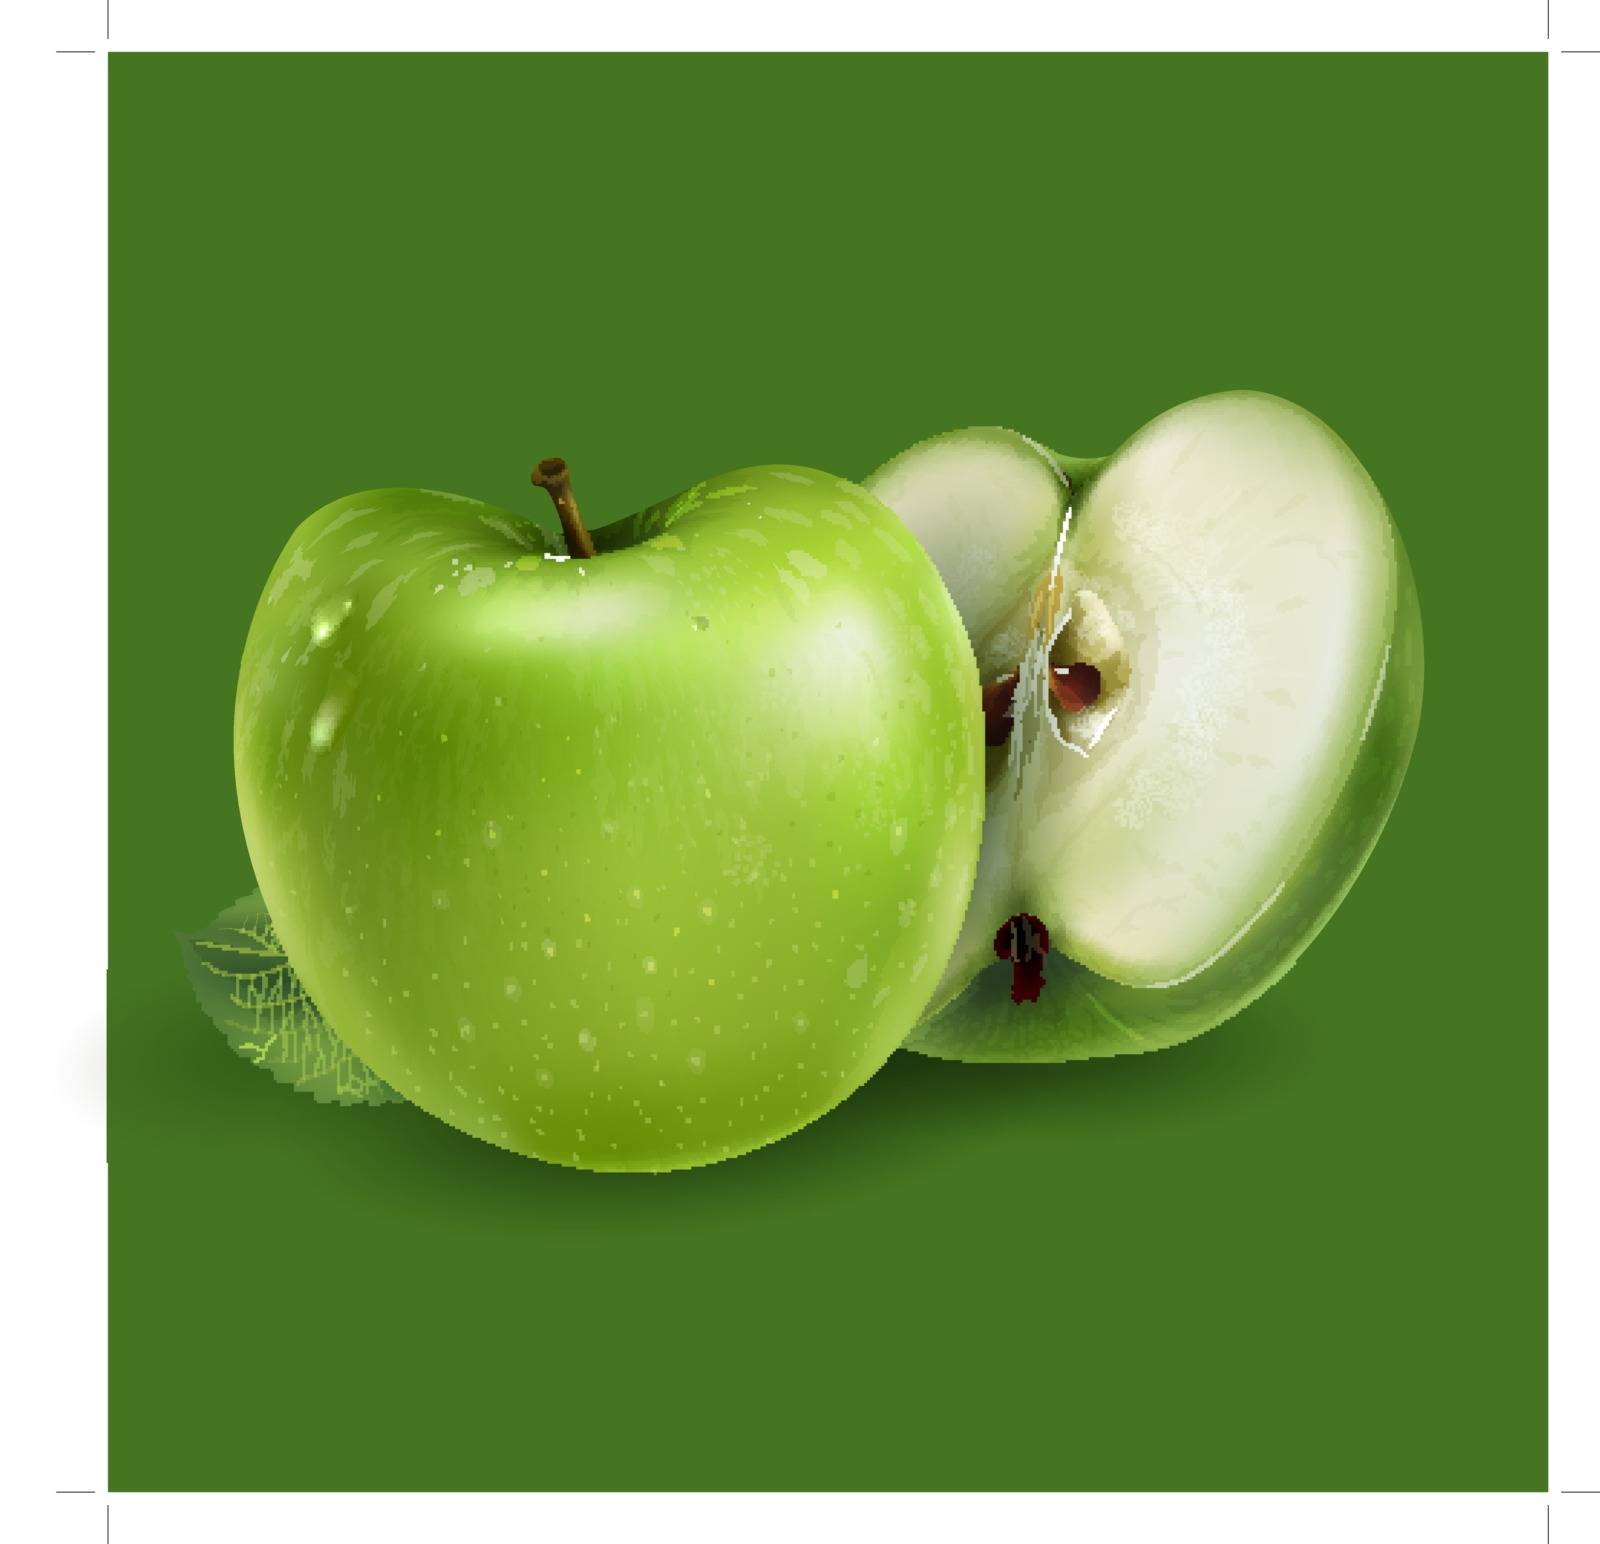 Green apples on a green background by ConceptCafe